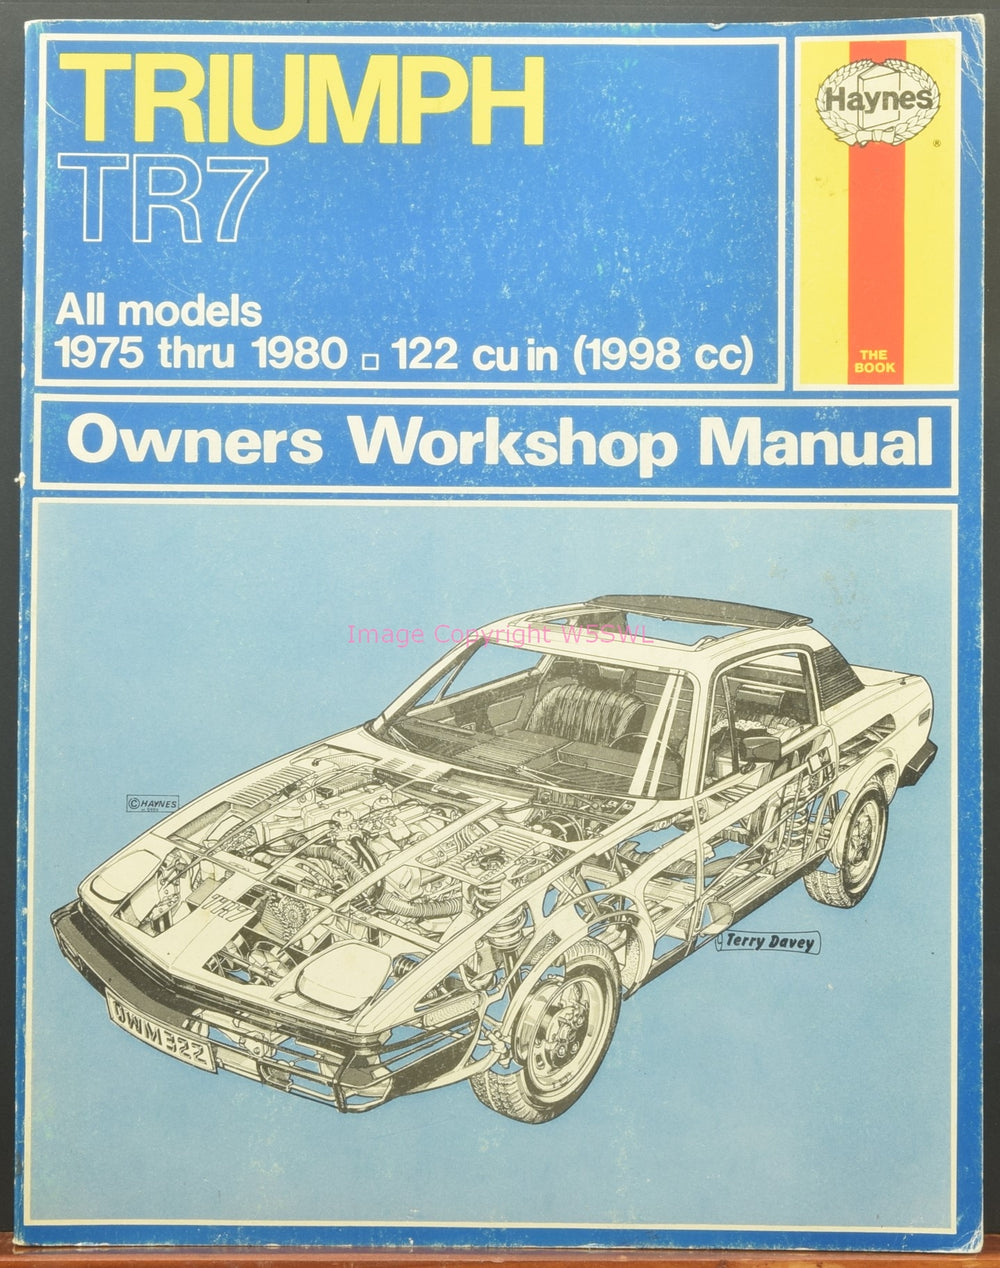 Triumph TR7 Owners Workshop Manual 1975 thru 1980 - Dave's Hobby Shop by W5SWL